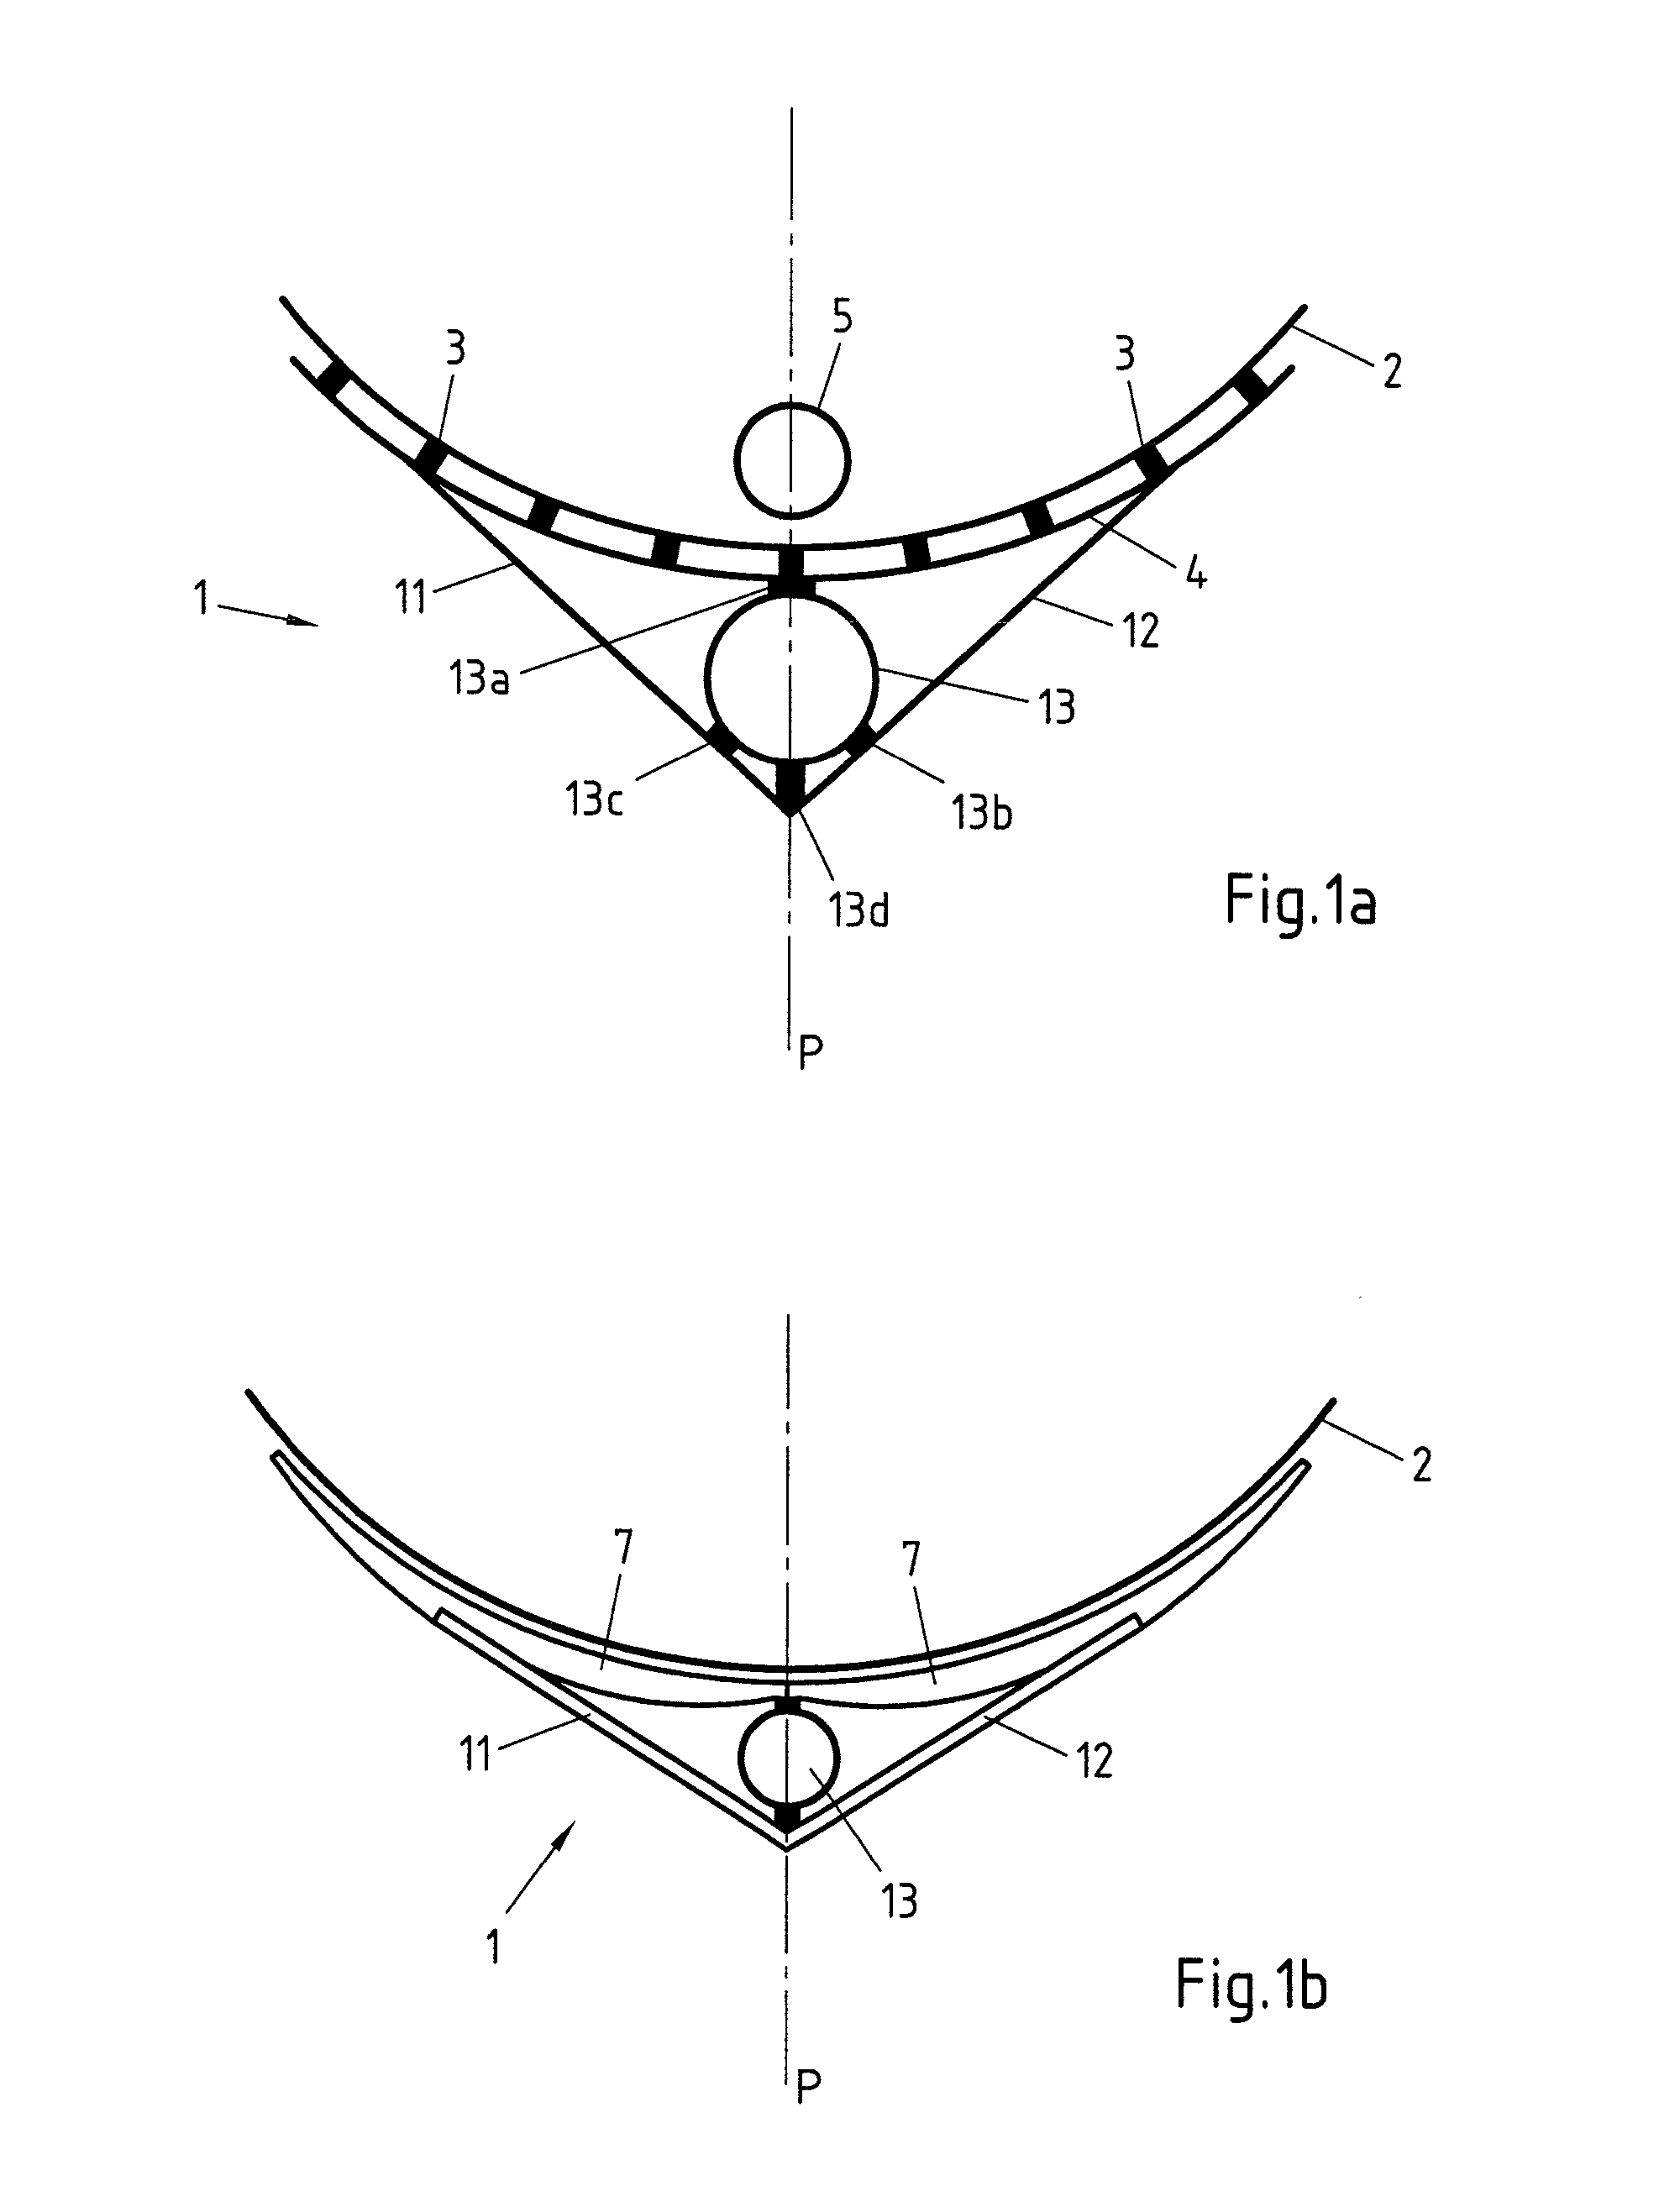 Supporting Device for a Curved Mirror